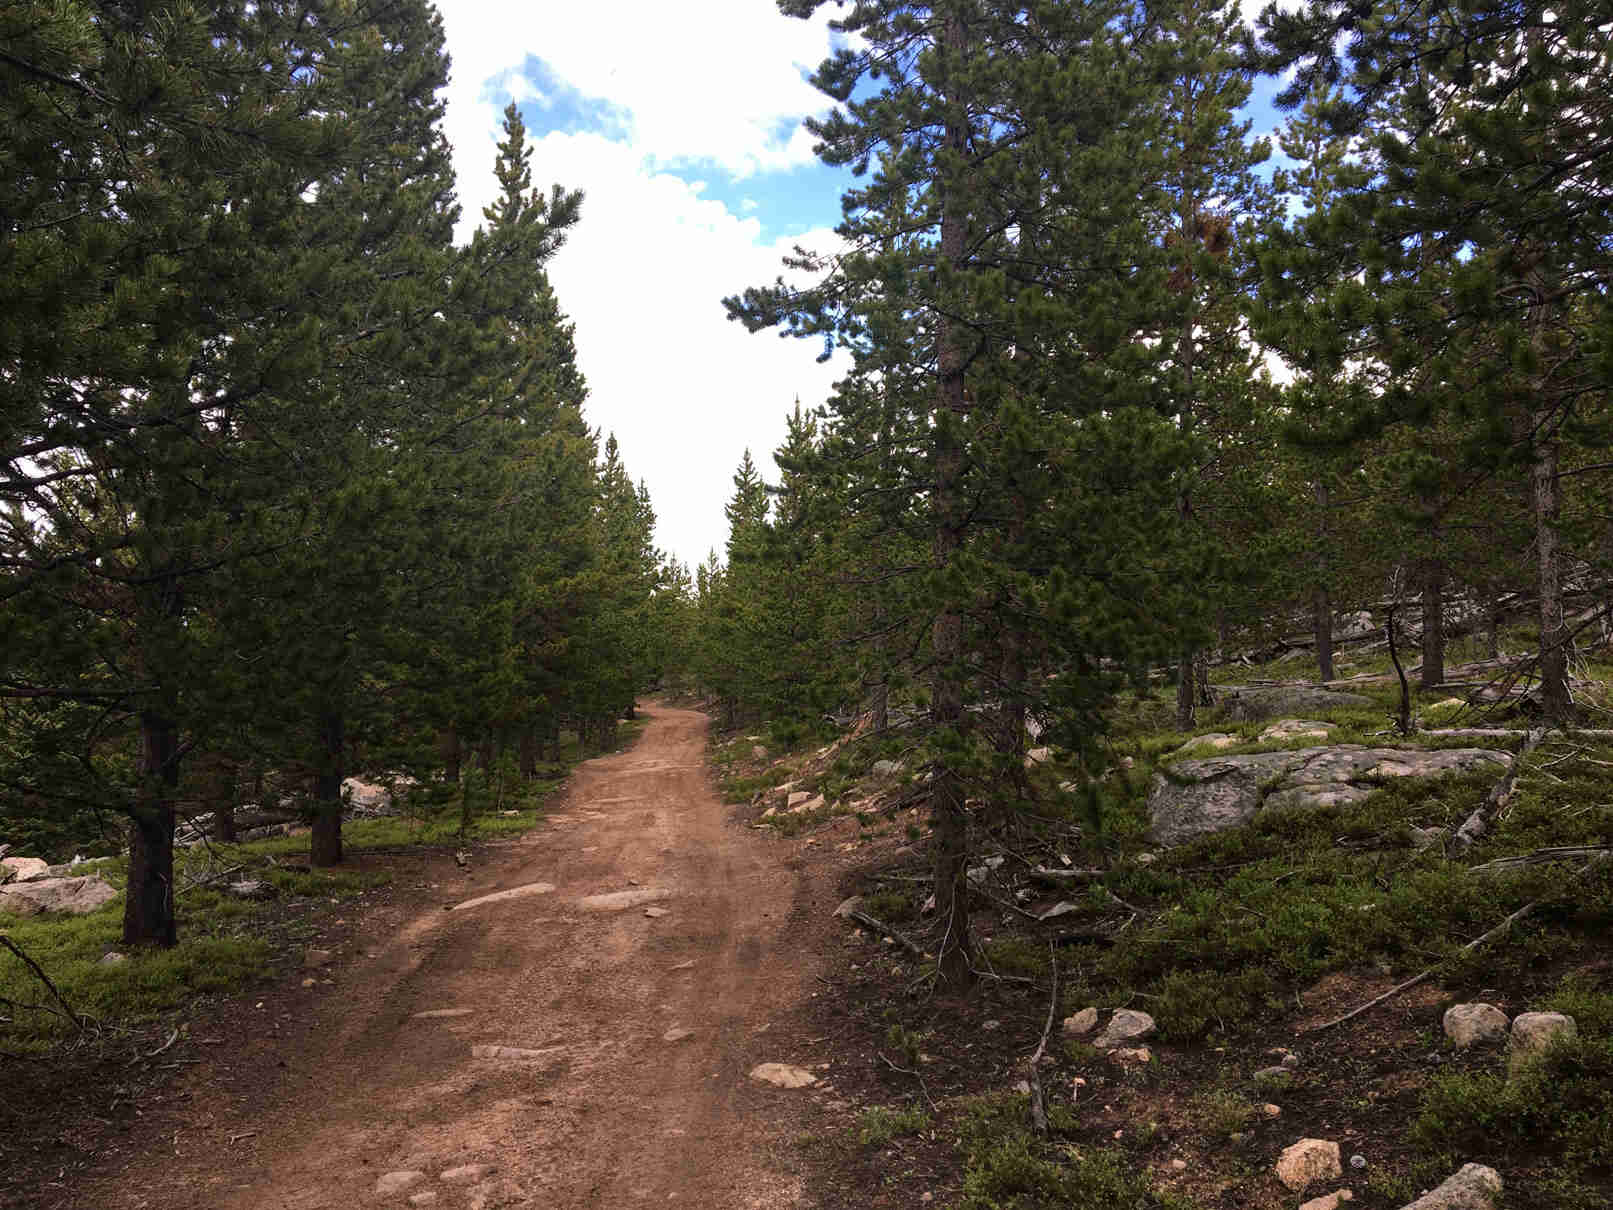 View down a dirt trail between pine trees